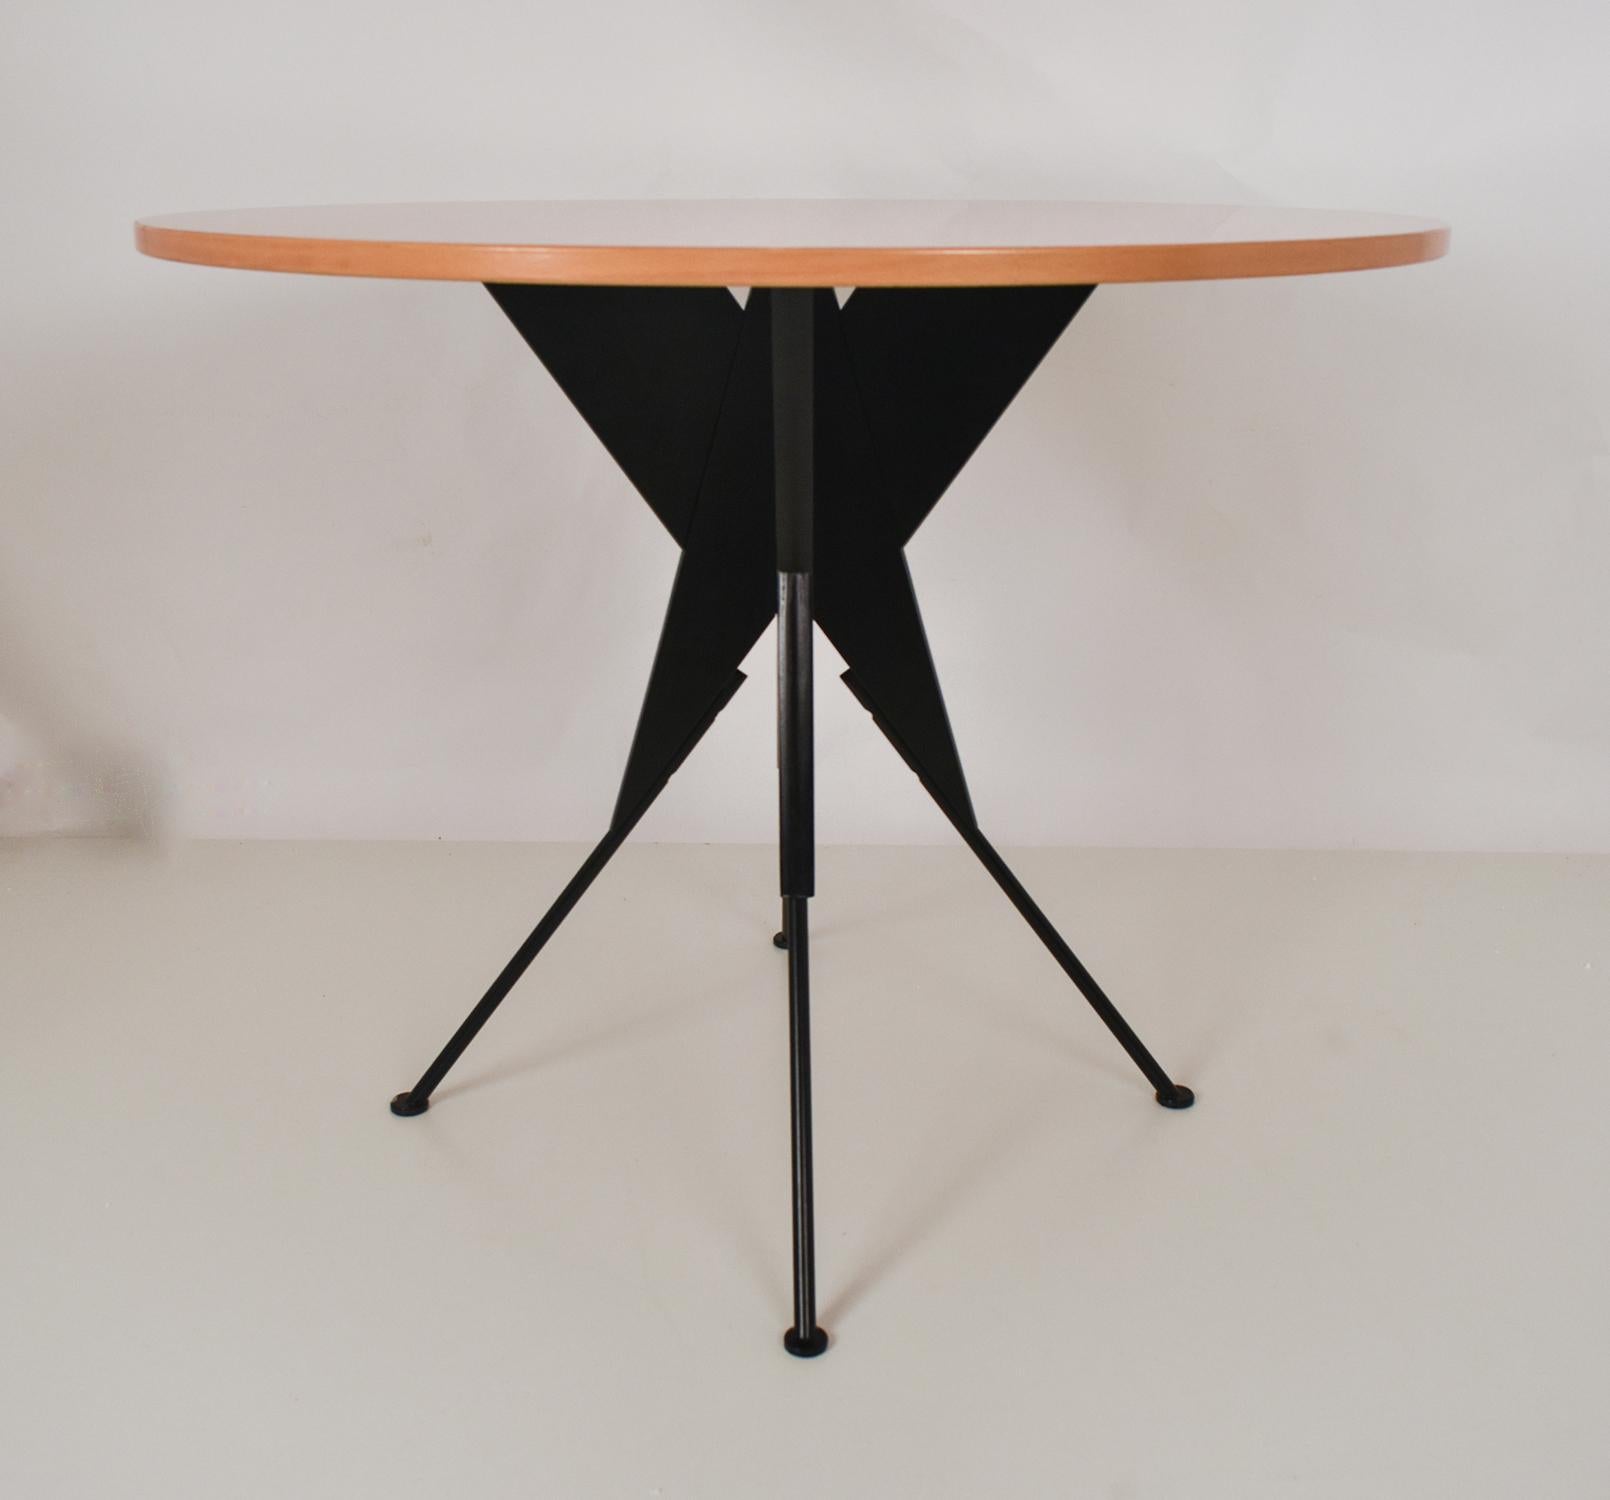 Table of precise and linear geometry that seeks in its constructive contradiction to recall the projection of a comet. Its materiality is captured by combining wood and metal.
The wooden table top was a commission.